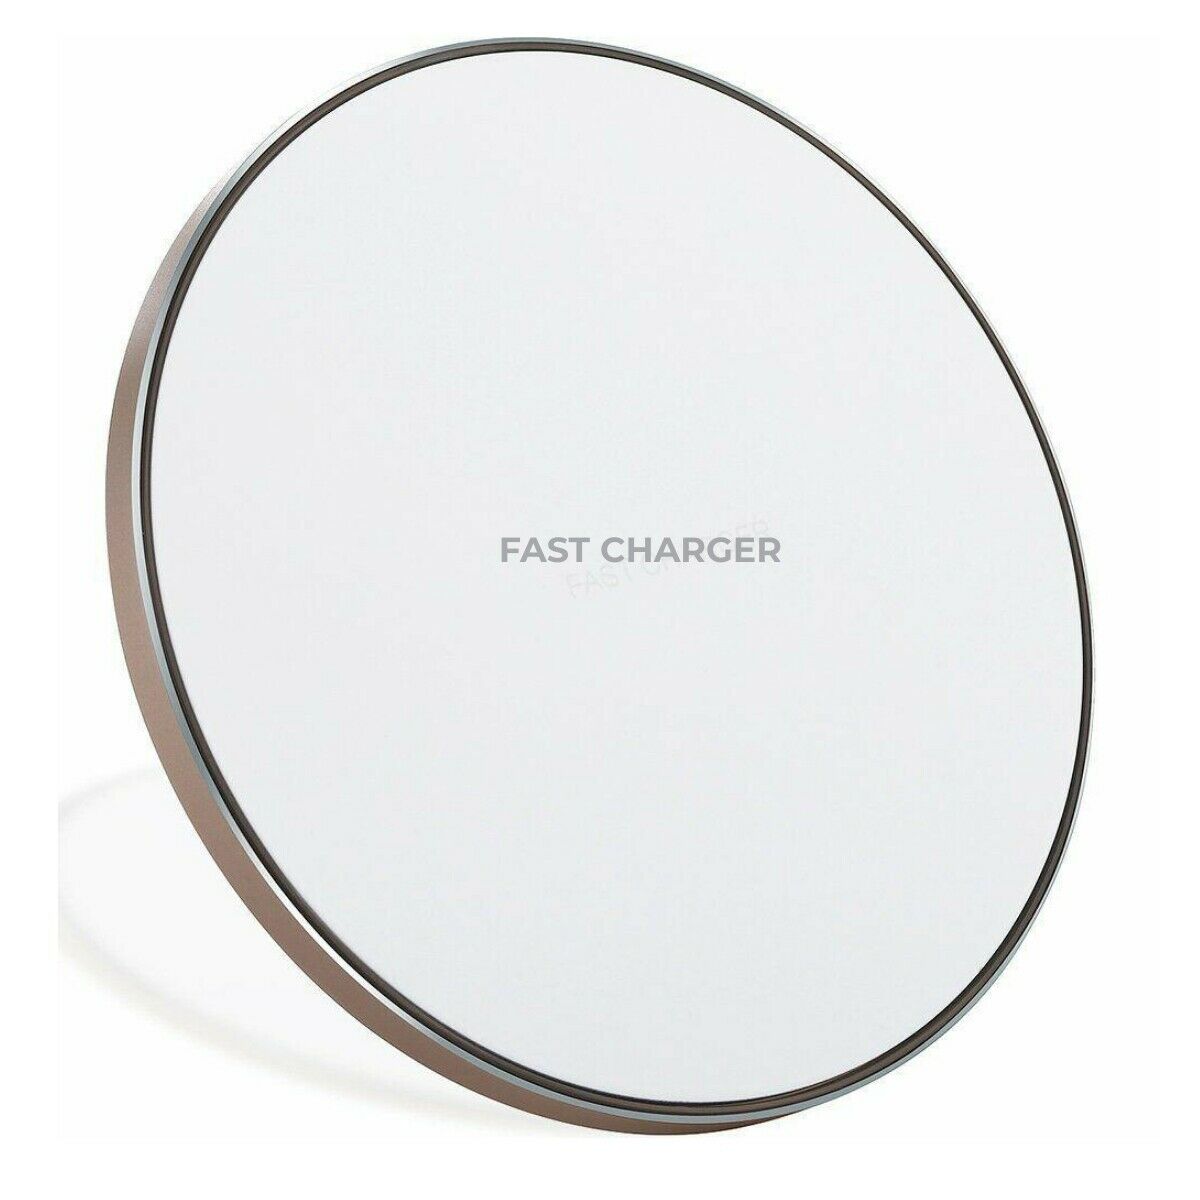 Qi Wireless Charger Fast Charging Pad for iPhone 8 X XS XR Samsung Galaxy S7 S8 S9 S10